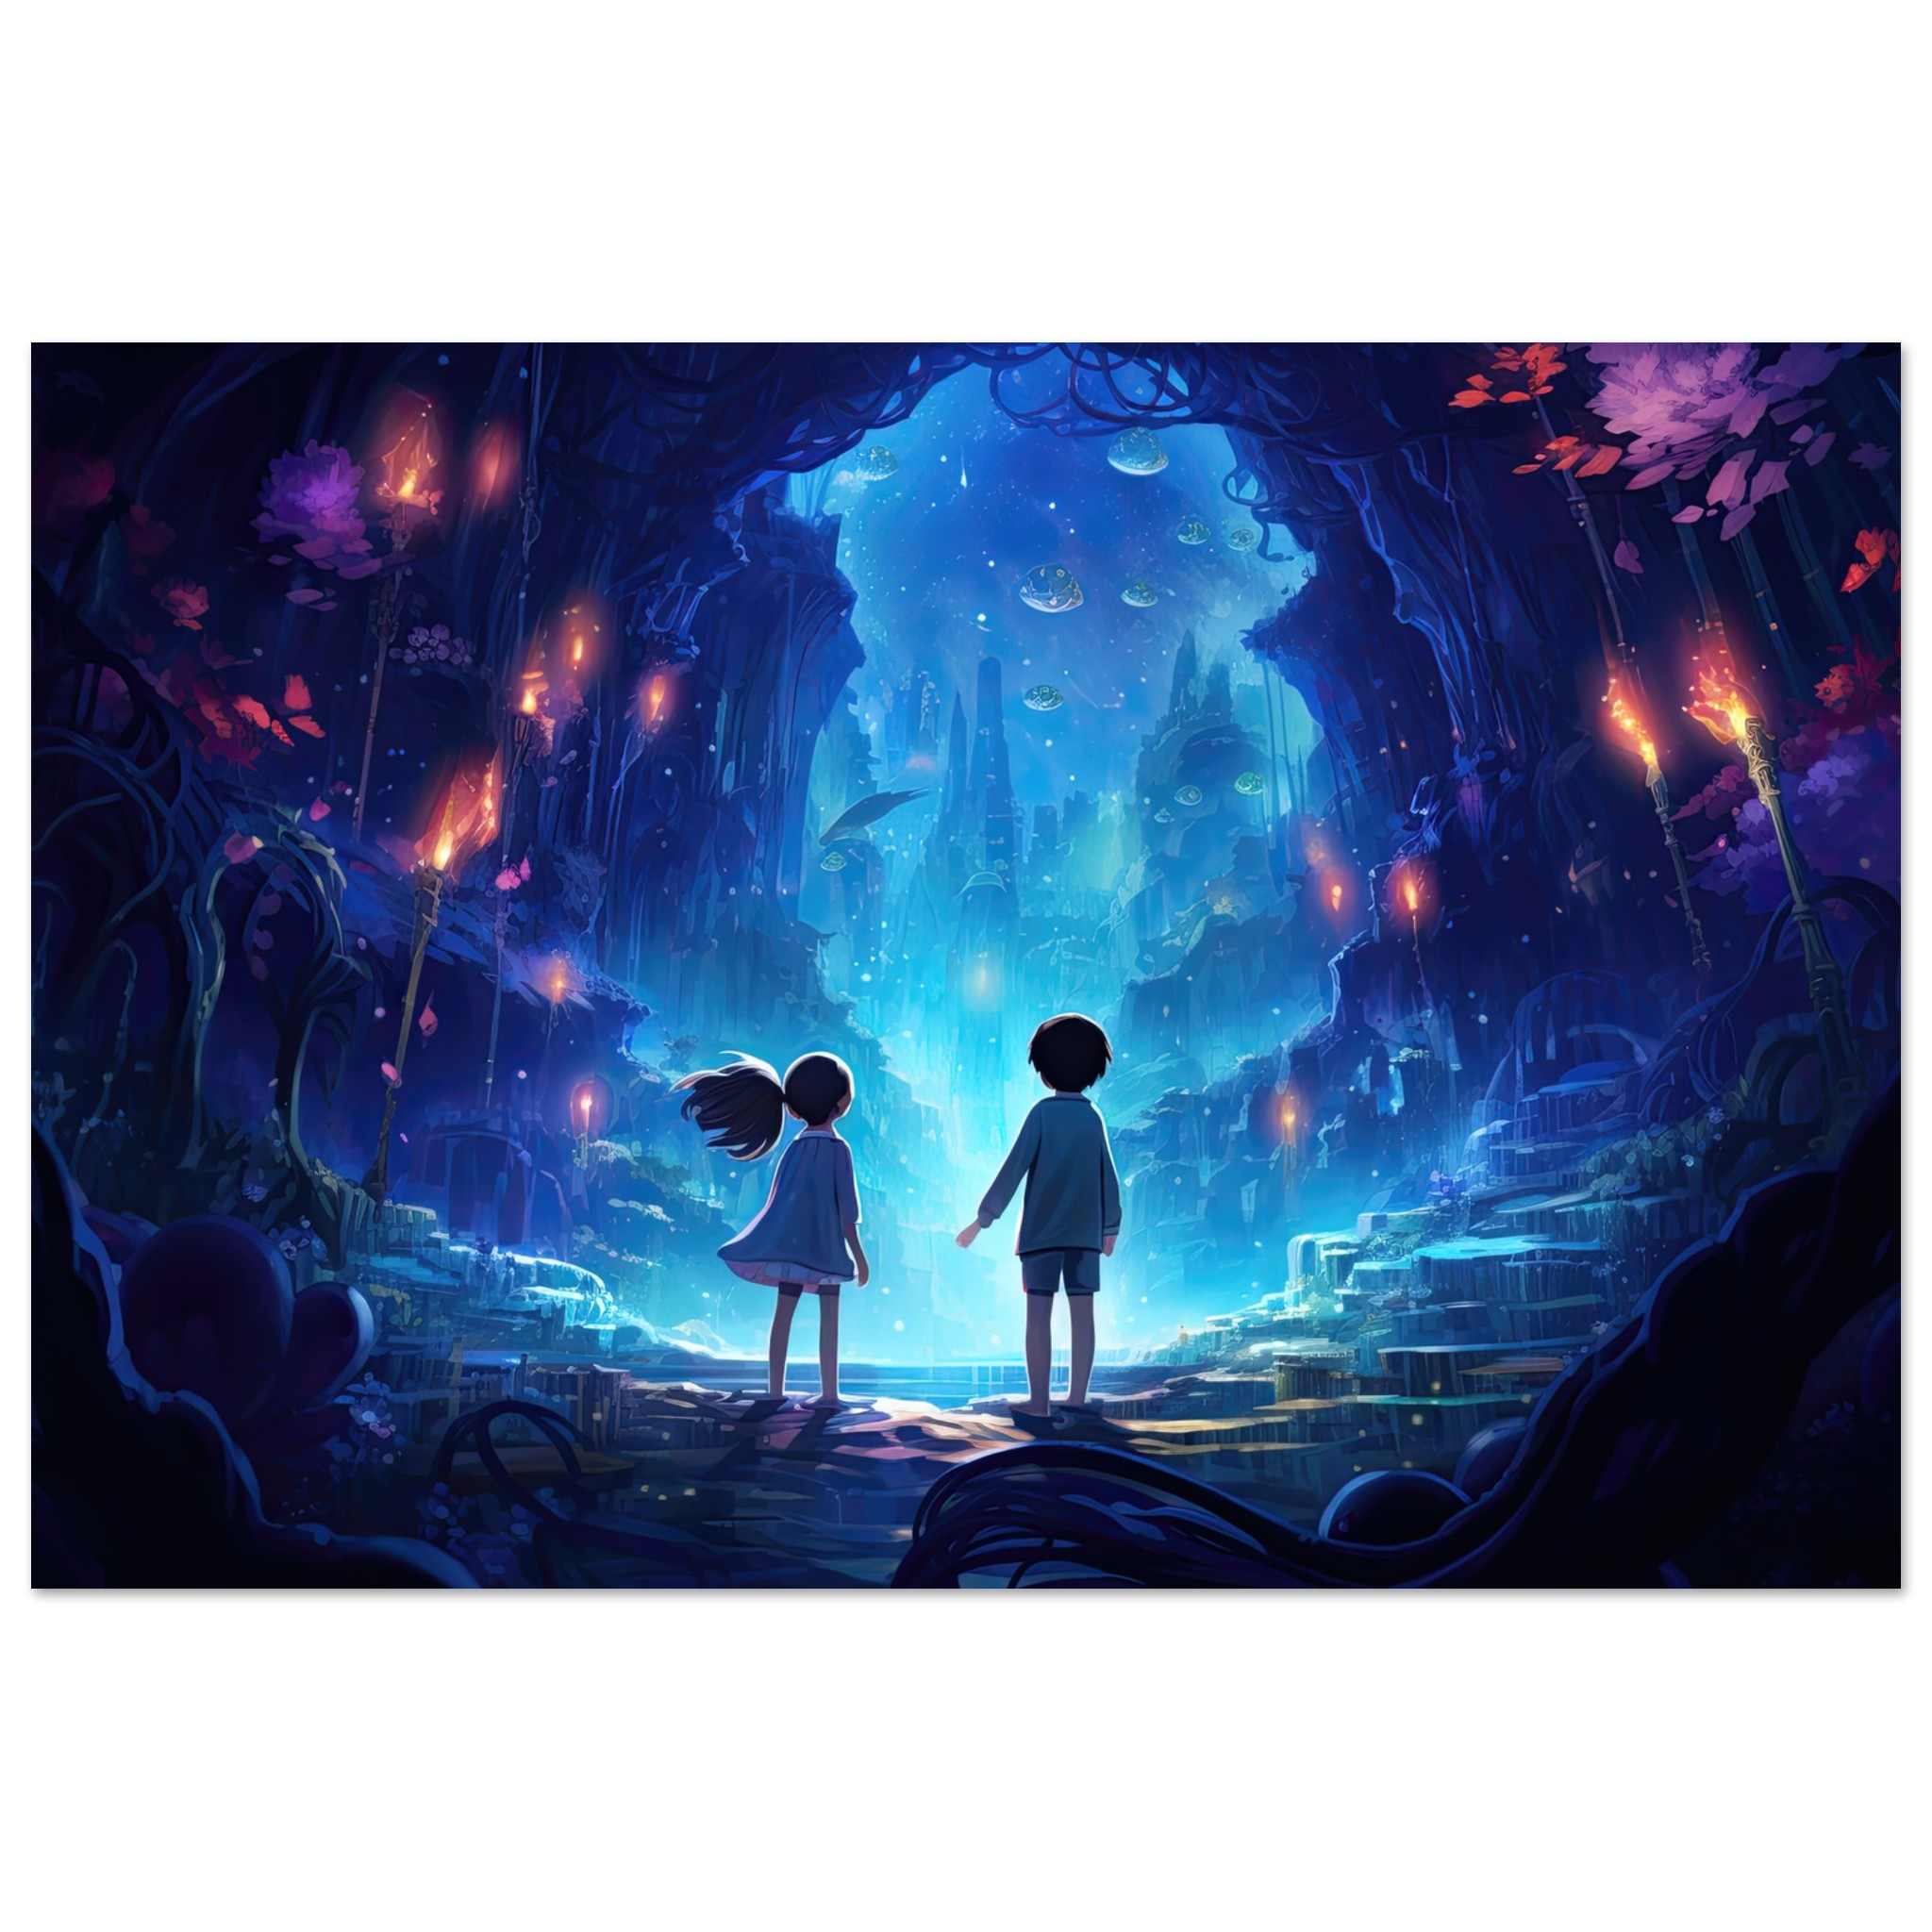 A World of Wonder - Anime Style Poster - 60x90 cm / 24x36″